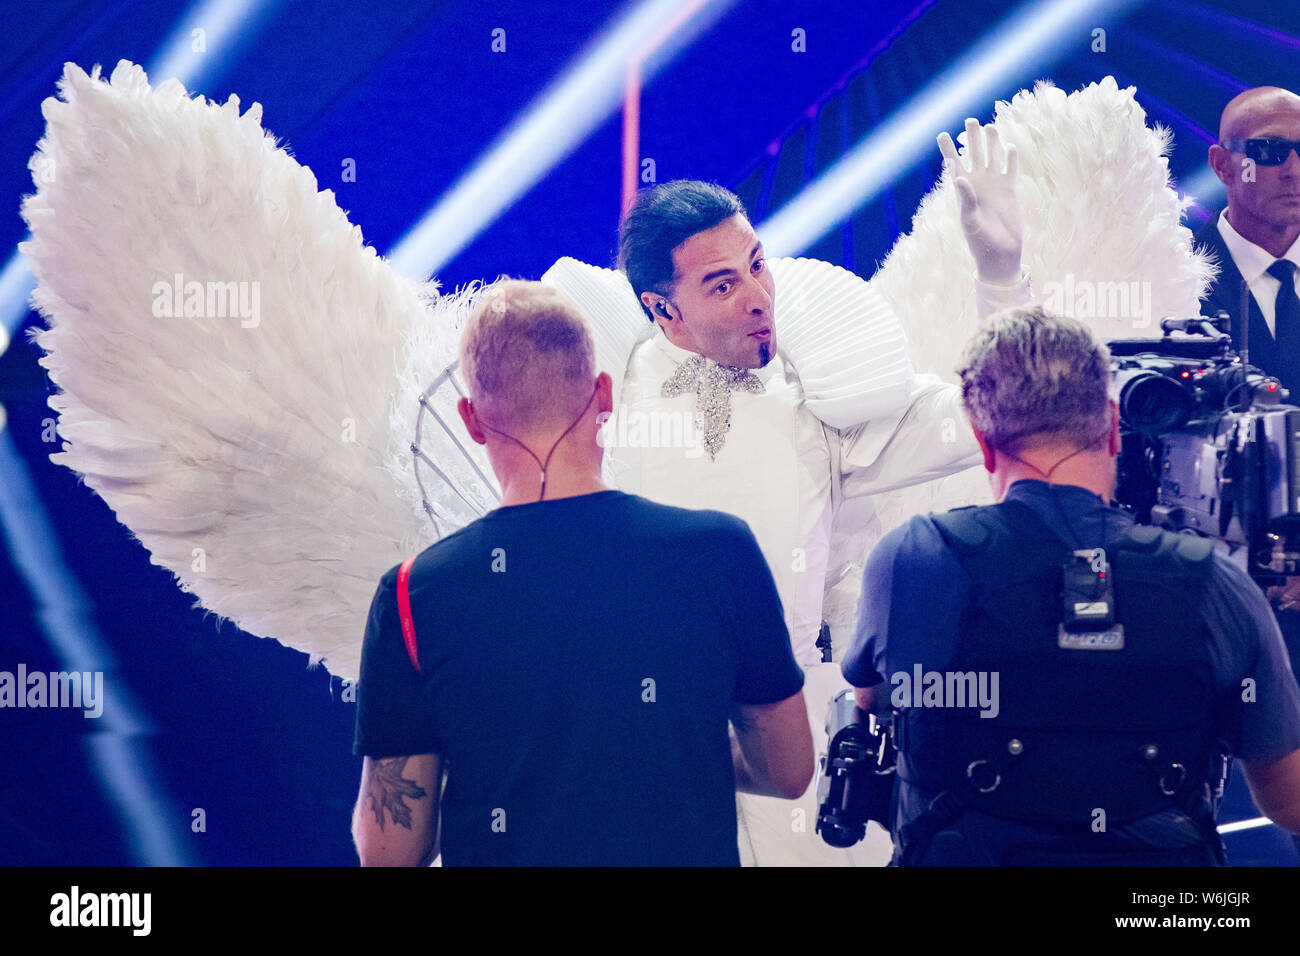 Cologne, Germany. 01st Aug, 2019. The comedian Bülent Ceylan (M) is on  stage as "Angel" at the ProSieben show "The Masked Singer". Credit: Marcel  Kusch/dpa/Alamy Live News Stock Photo - Alamy